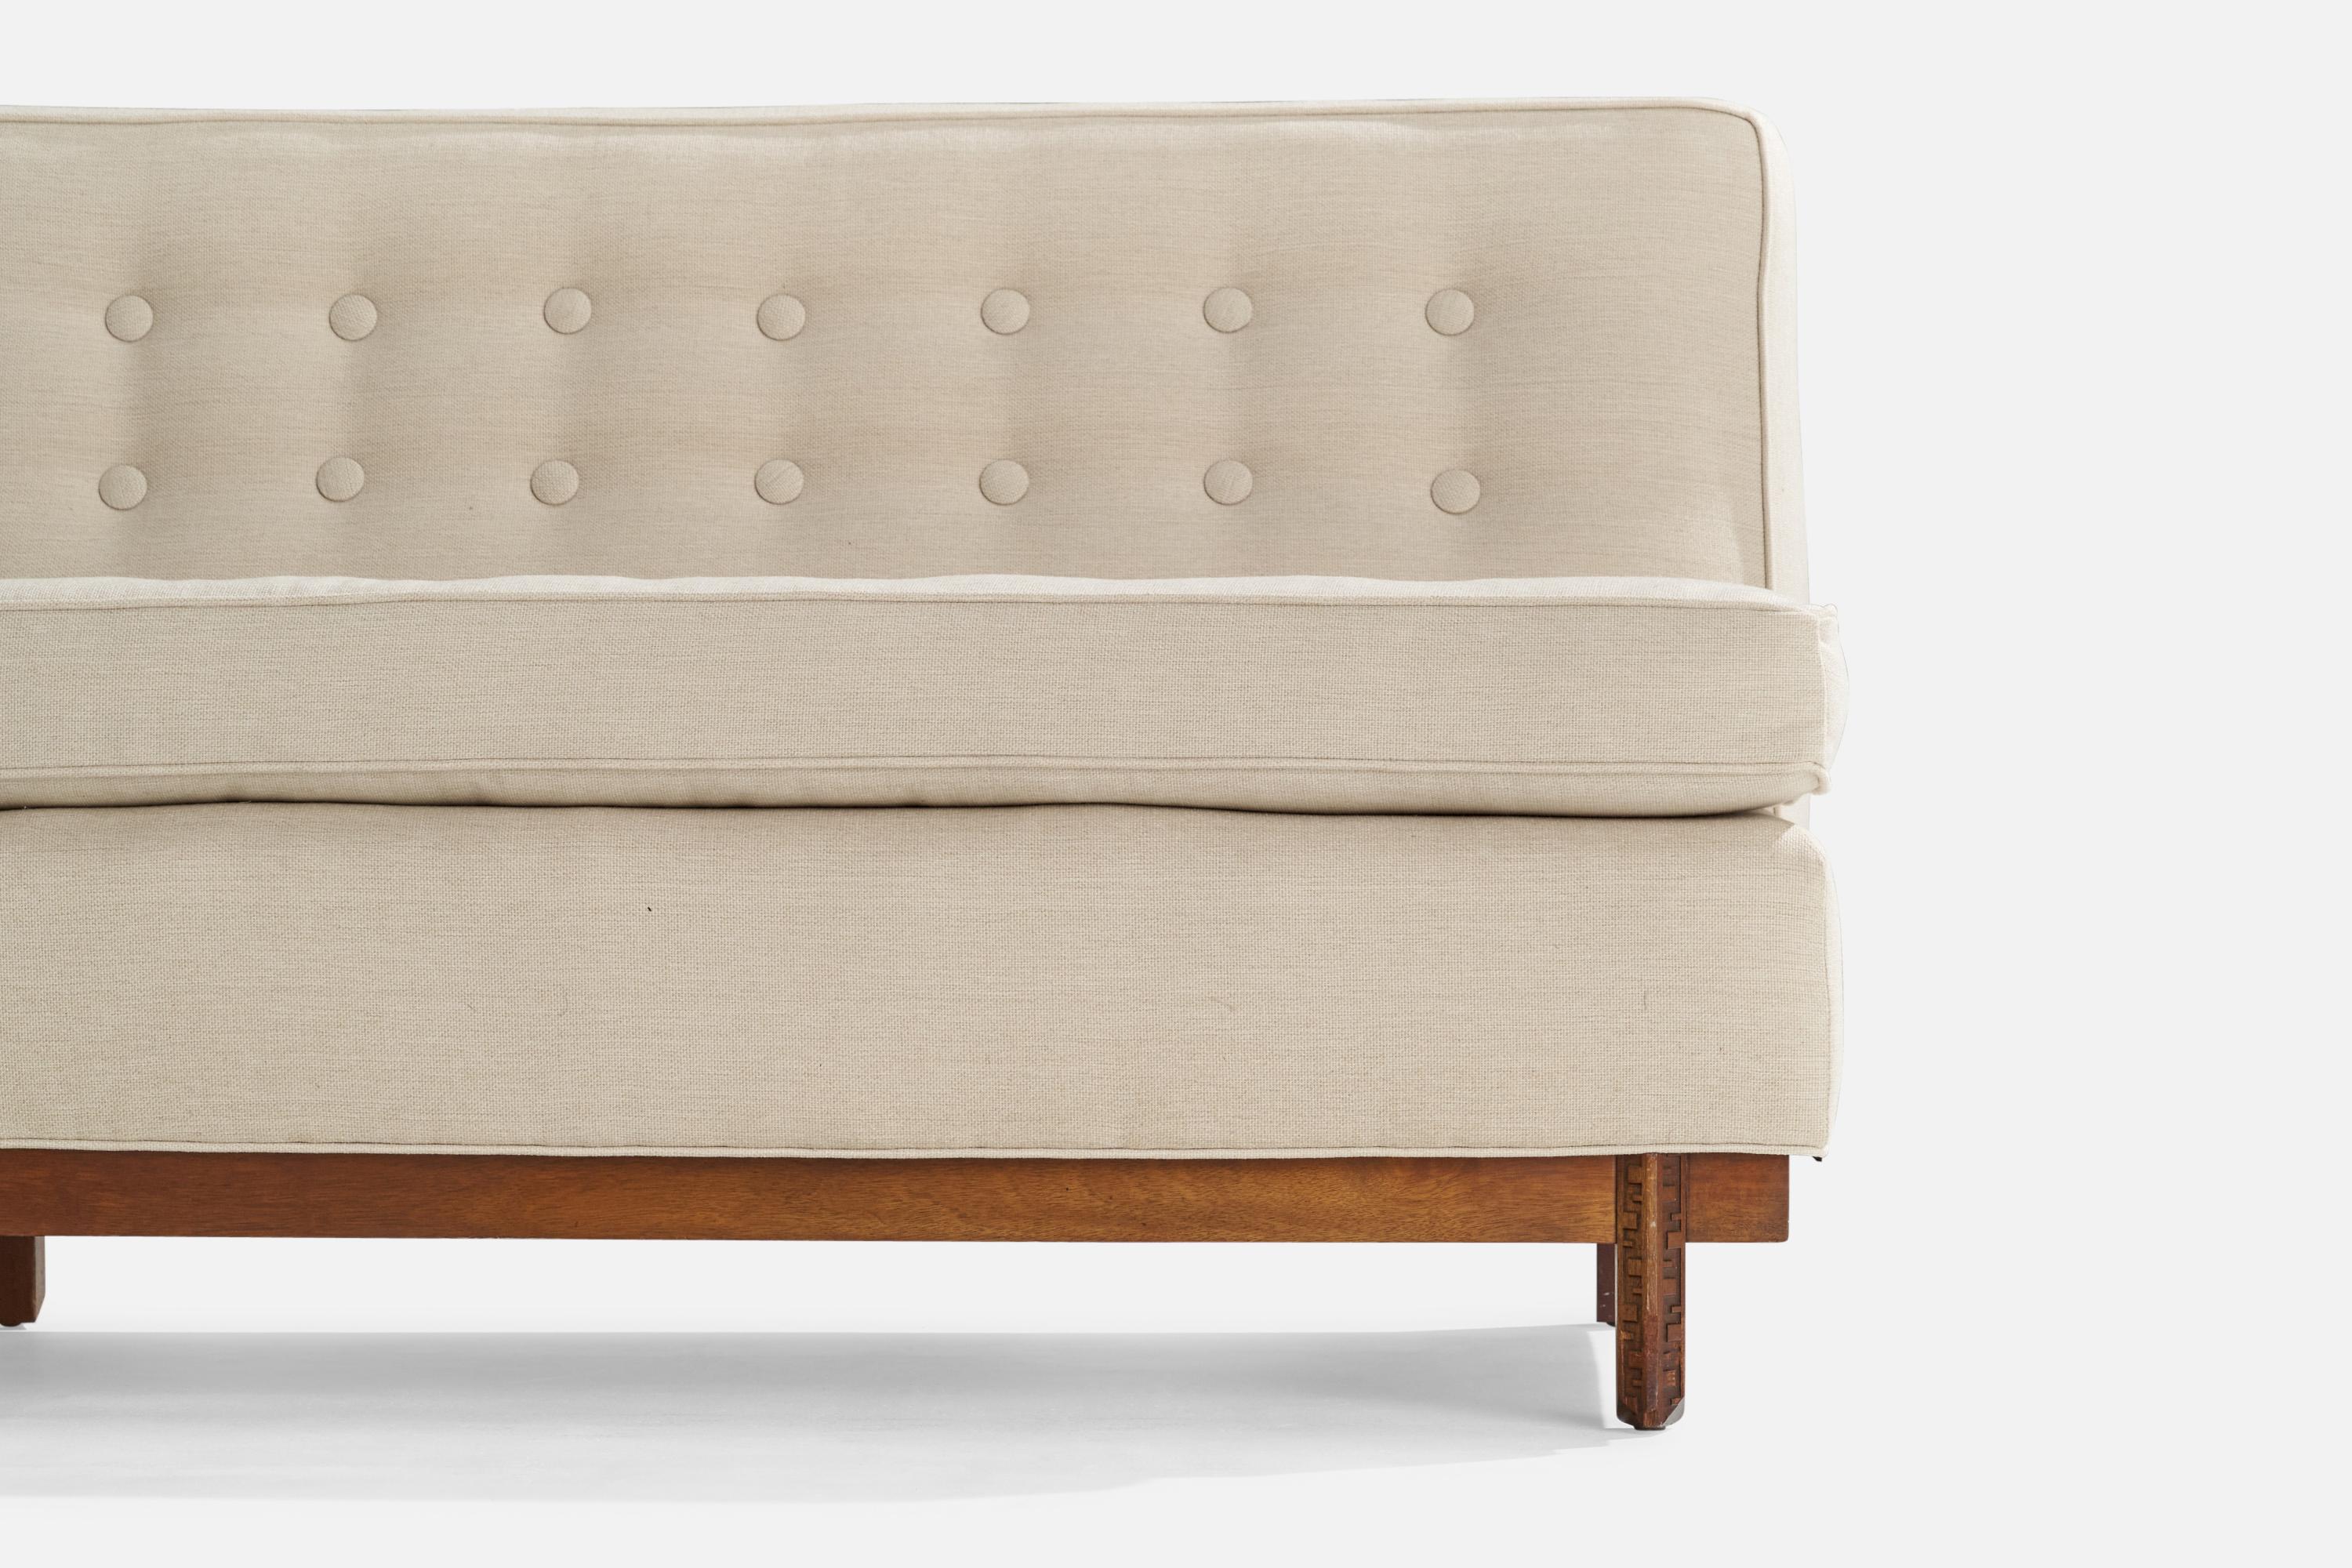 Frank Lloyd Wright, Settee, Fabric, Mahogany, USA, 1956 In Good Condition For Sale In High Point, NC